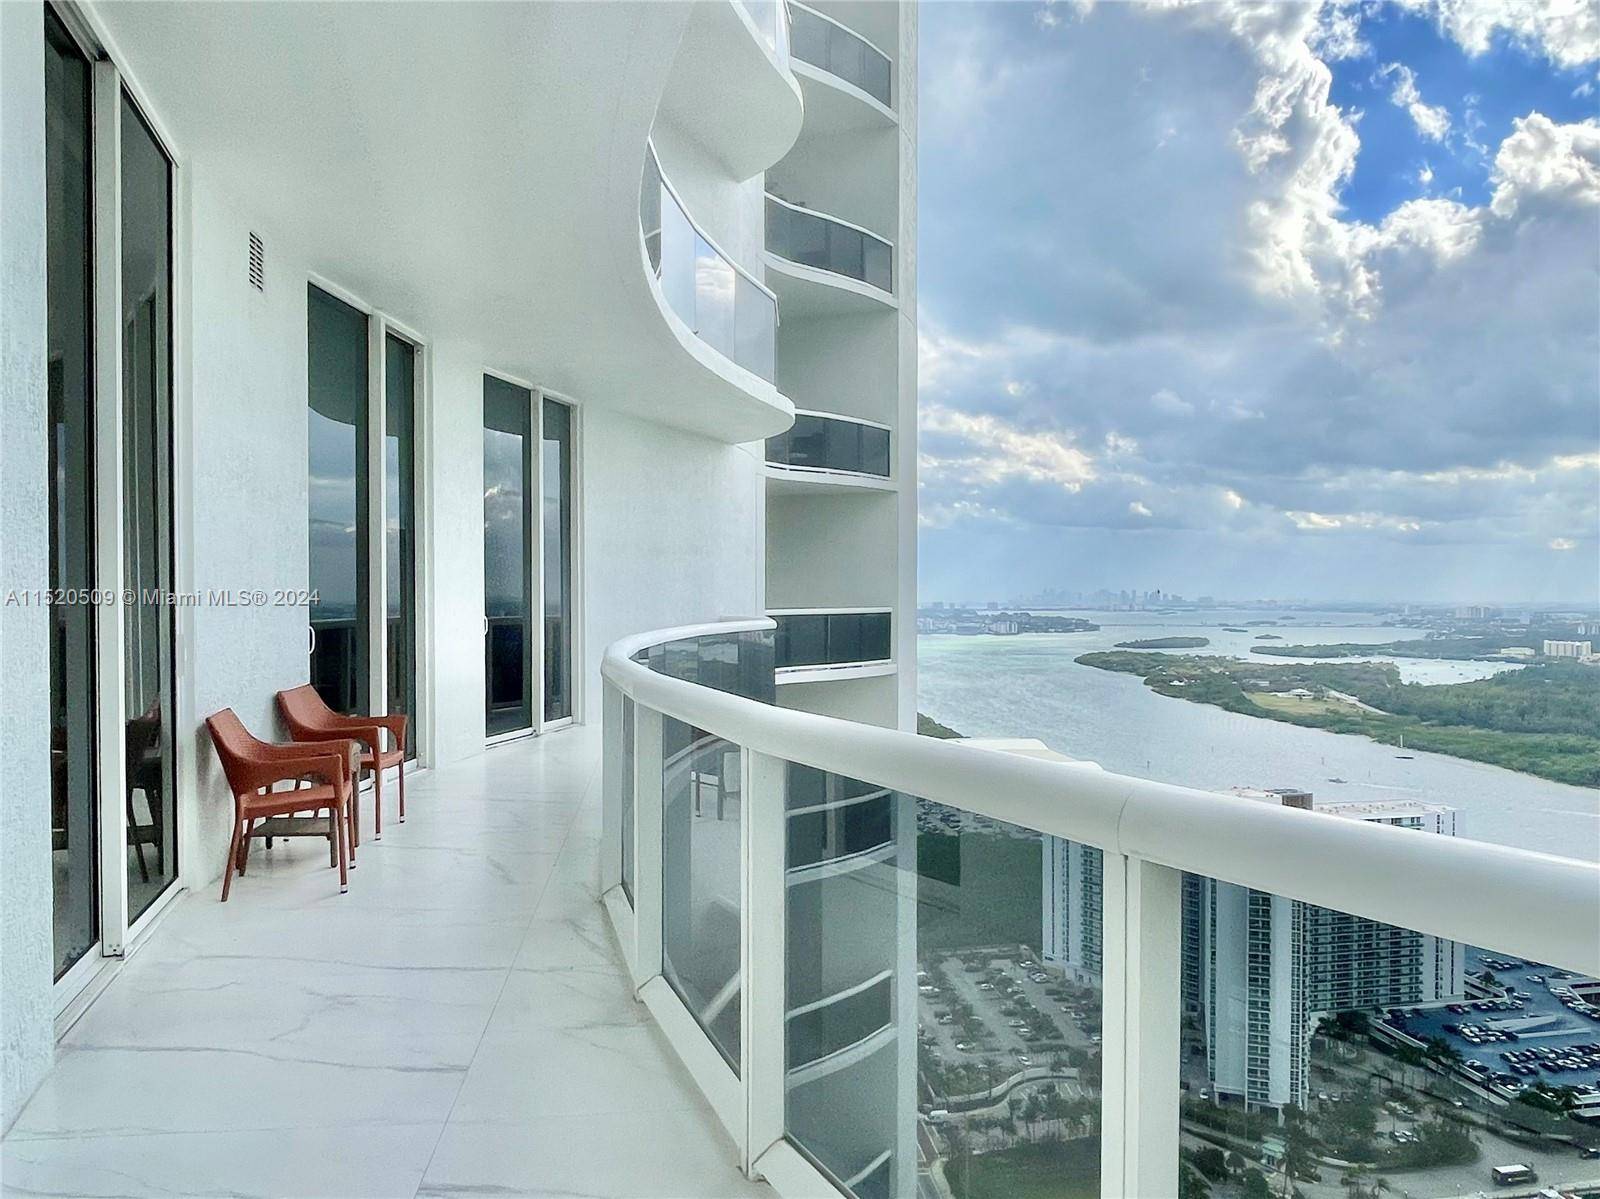 Enjoy breathtaking, unobstructed views of the Intercoastal from this luxurious high rise located on the pristine beaches of Sunny Isles.